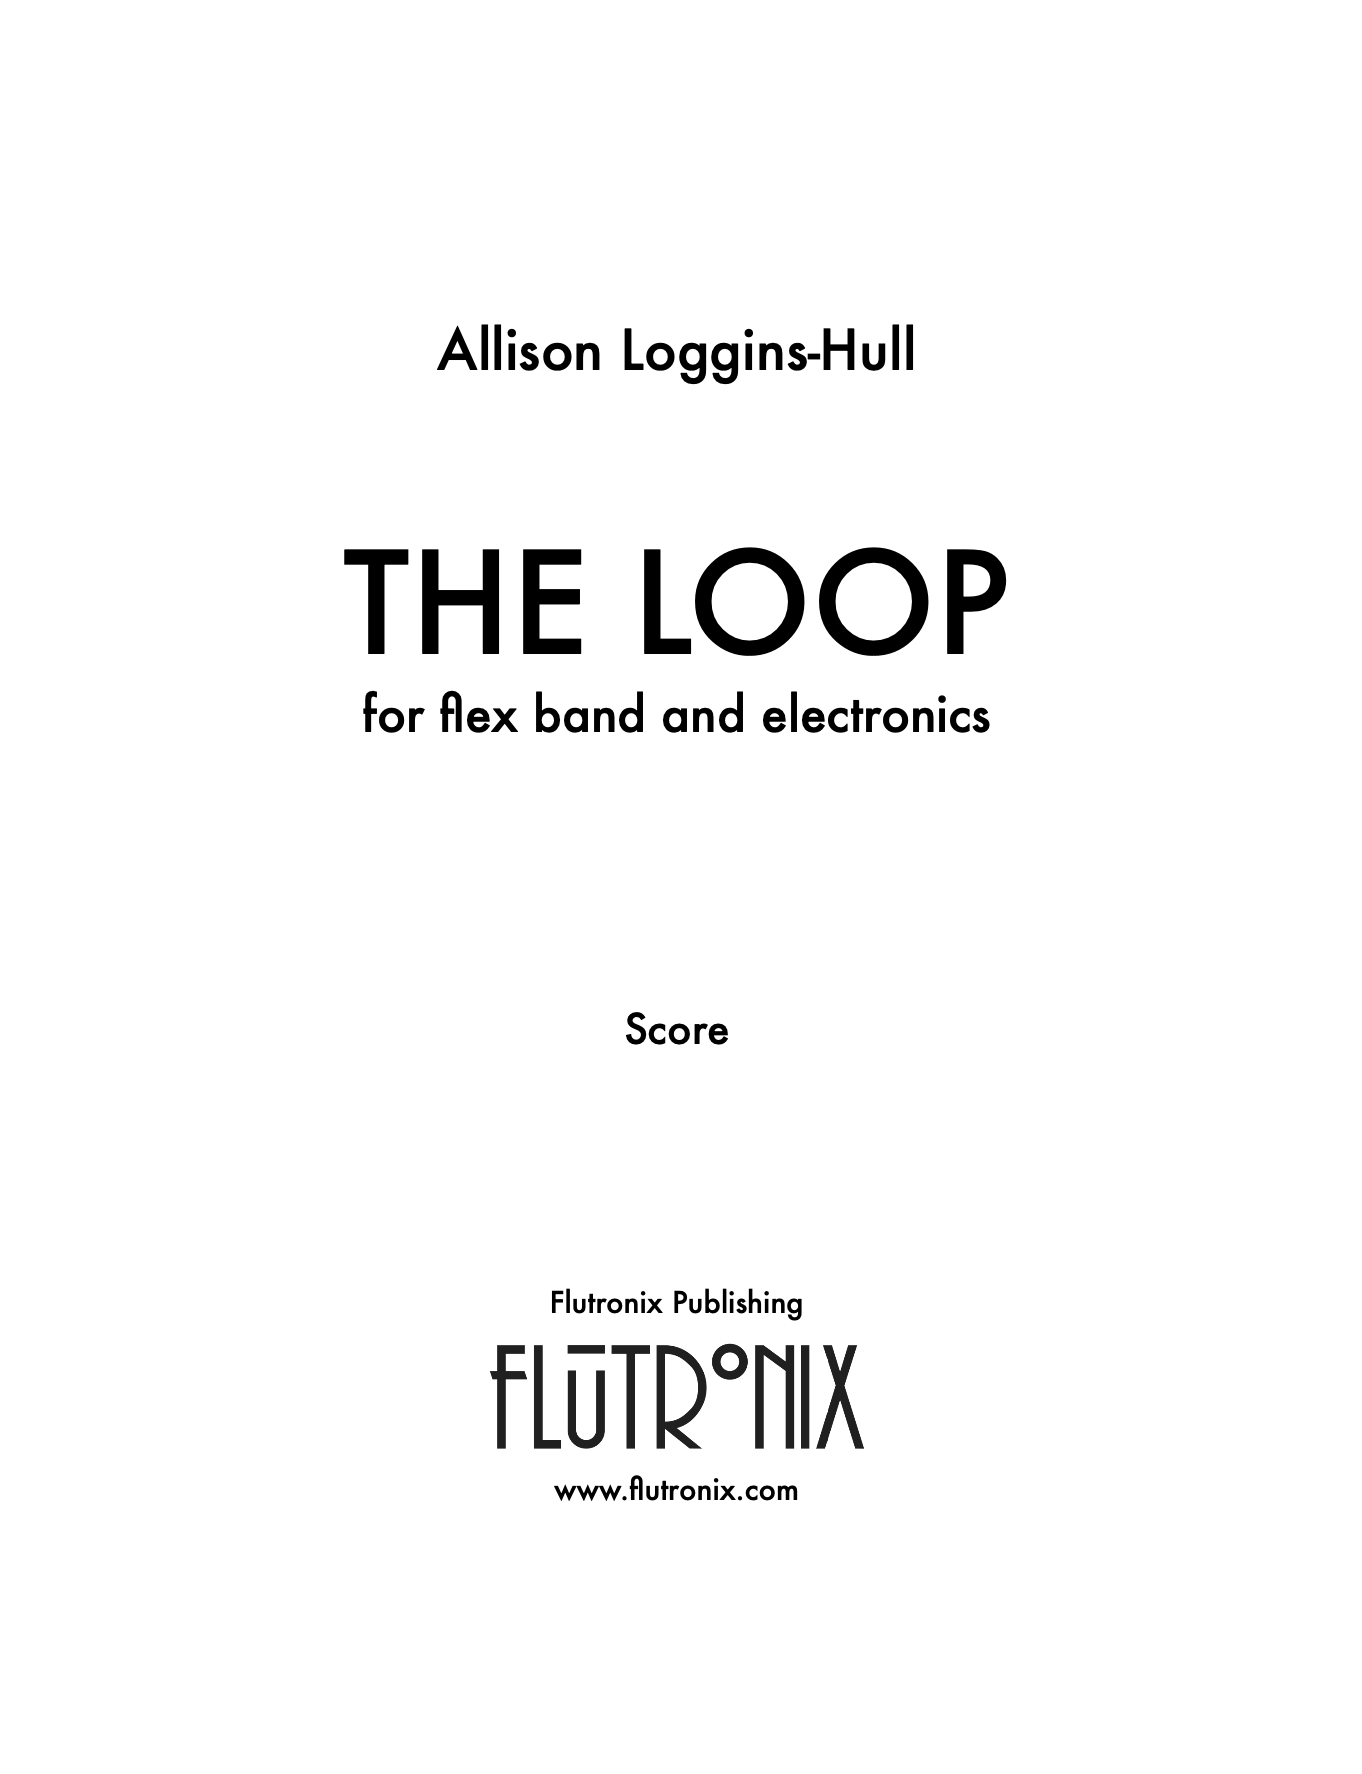 The Loop (Score Only) by Allison Loggins Hull